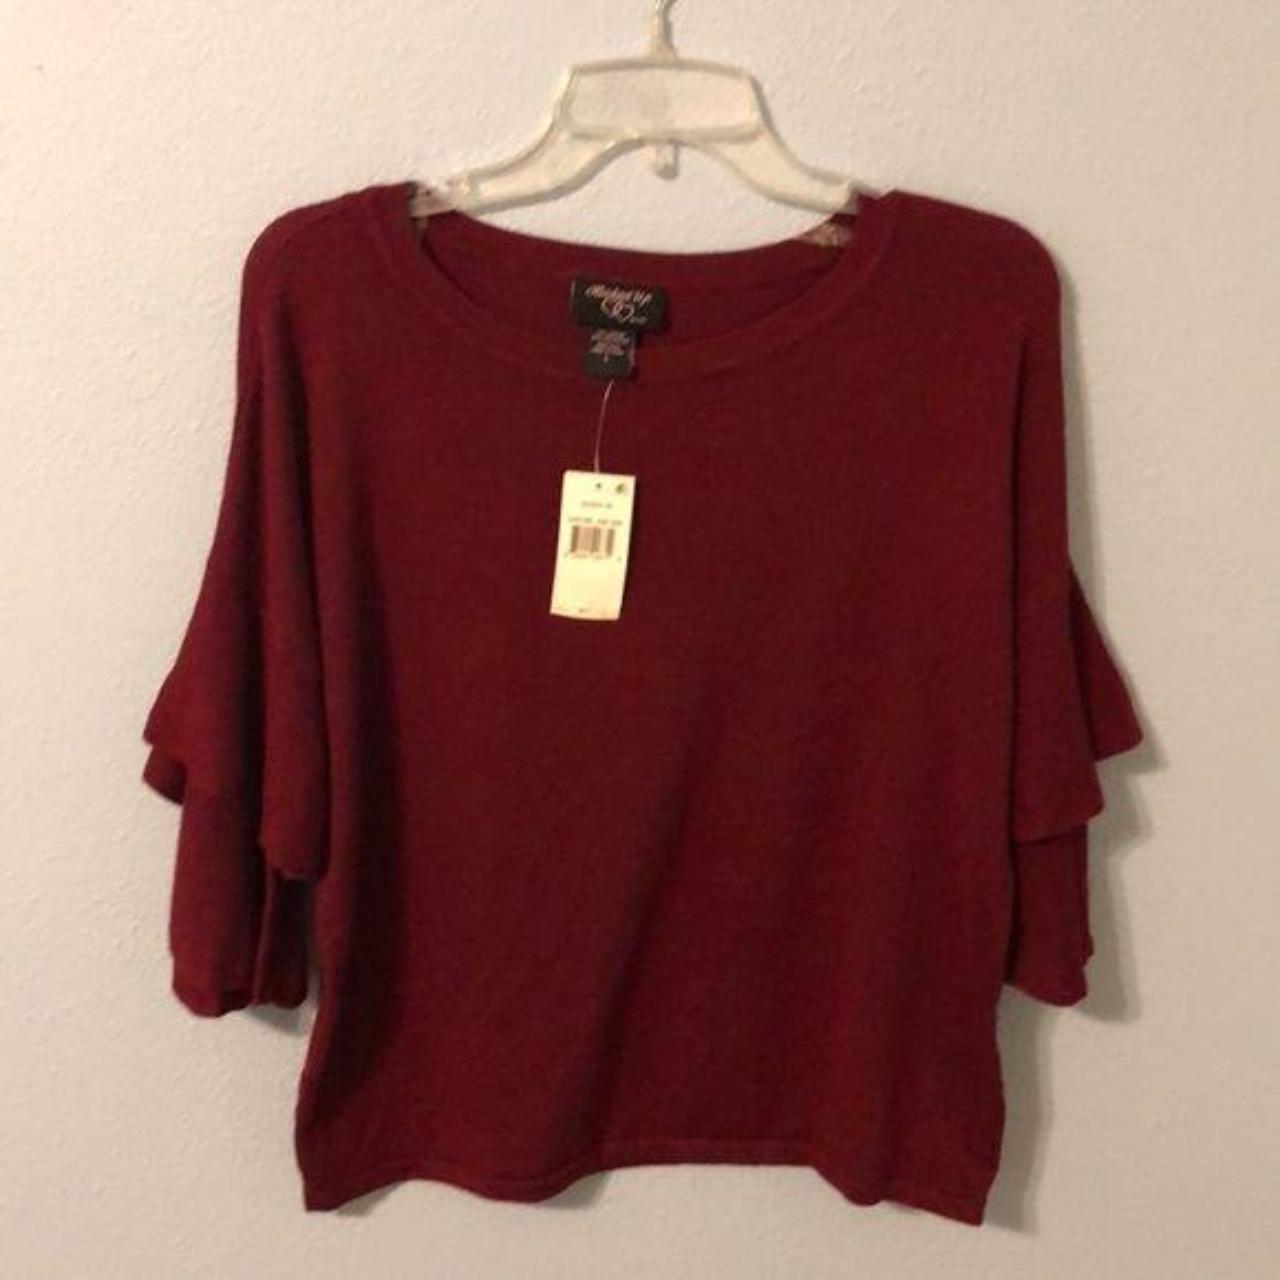 Hooked Up by IOT Women's Red and Burgundy Shirt (3)